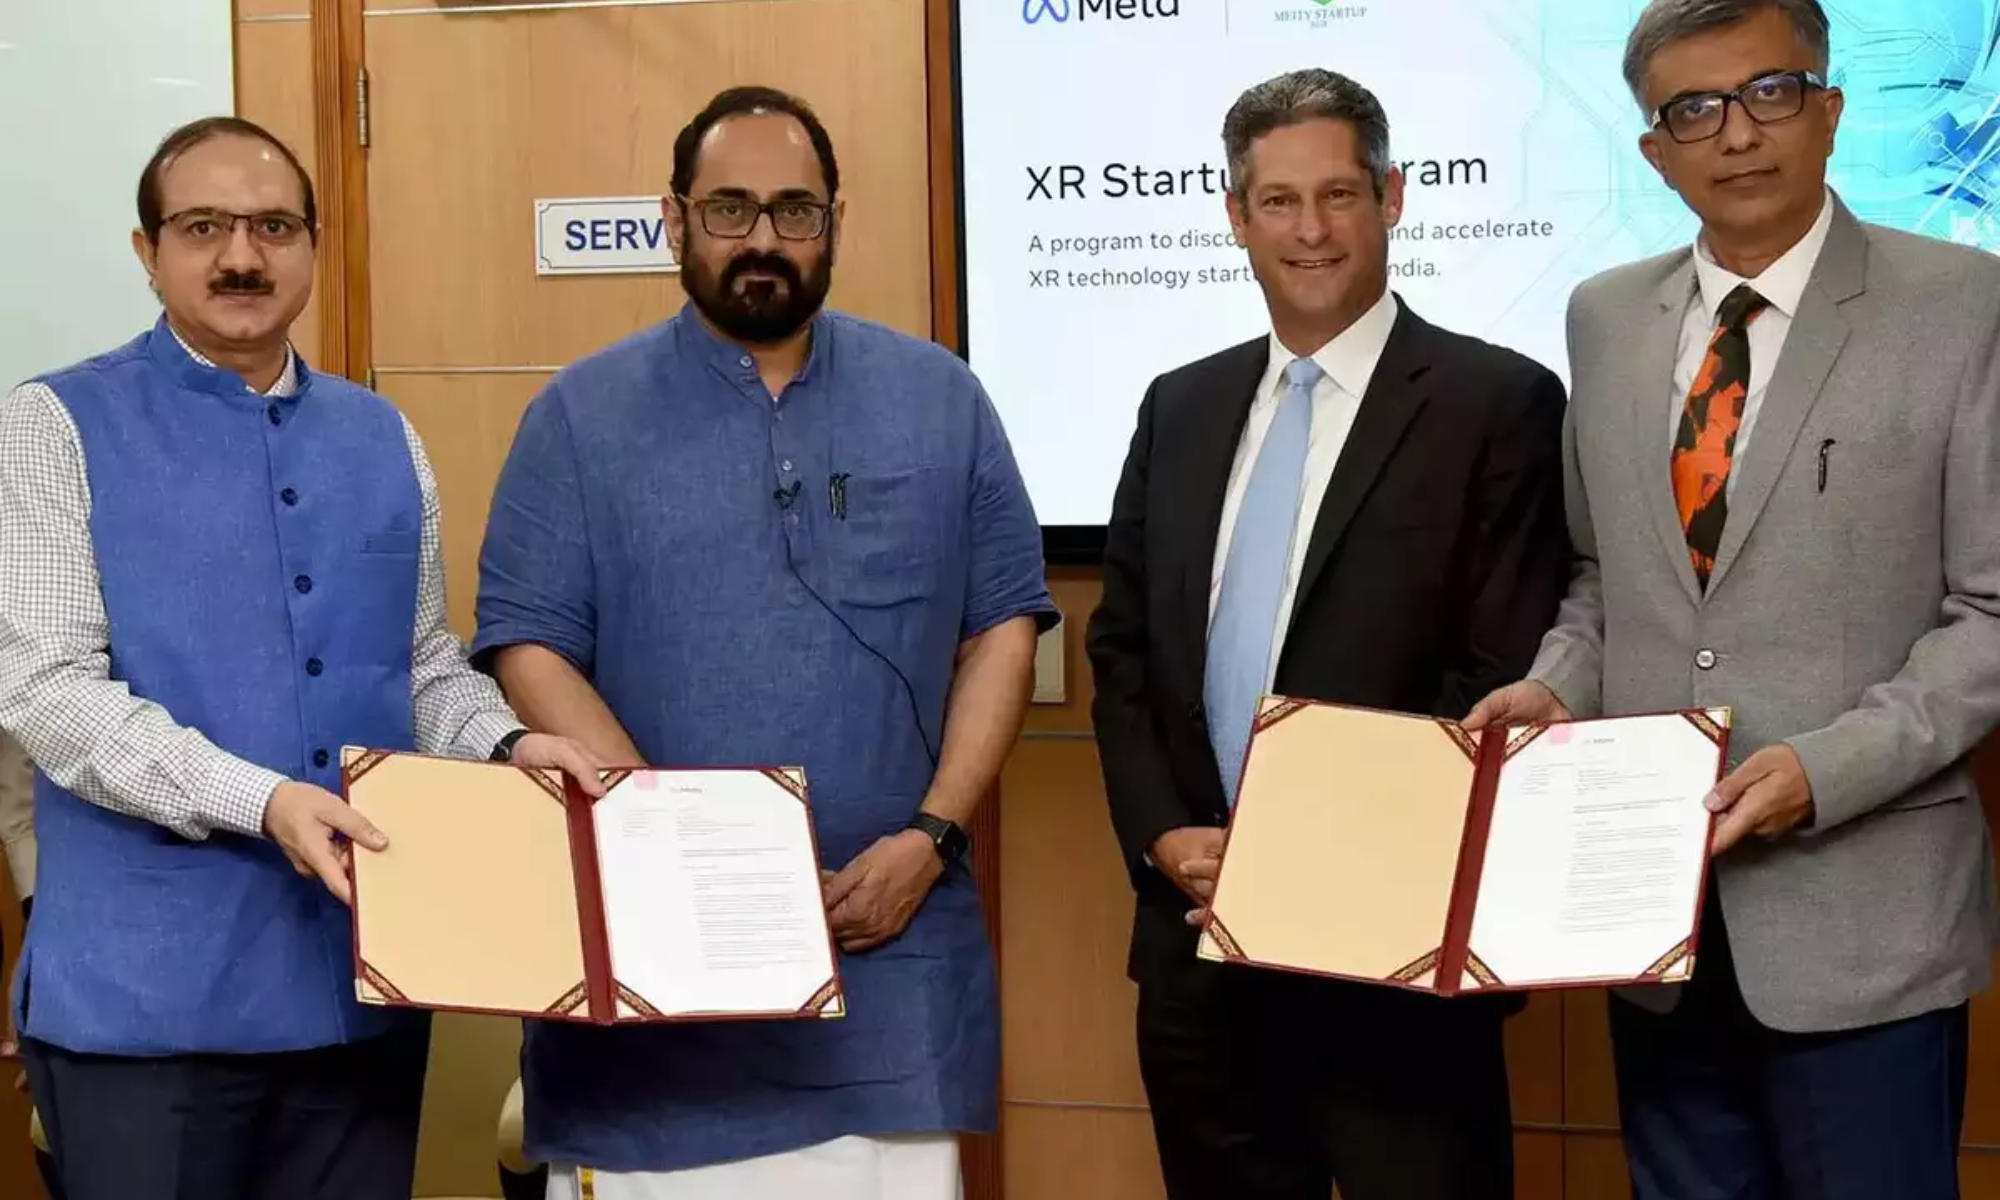 MeitY Startup Hub and Meta Collaborate to speed up XR technology startups in India_40.1